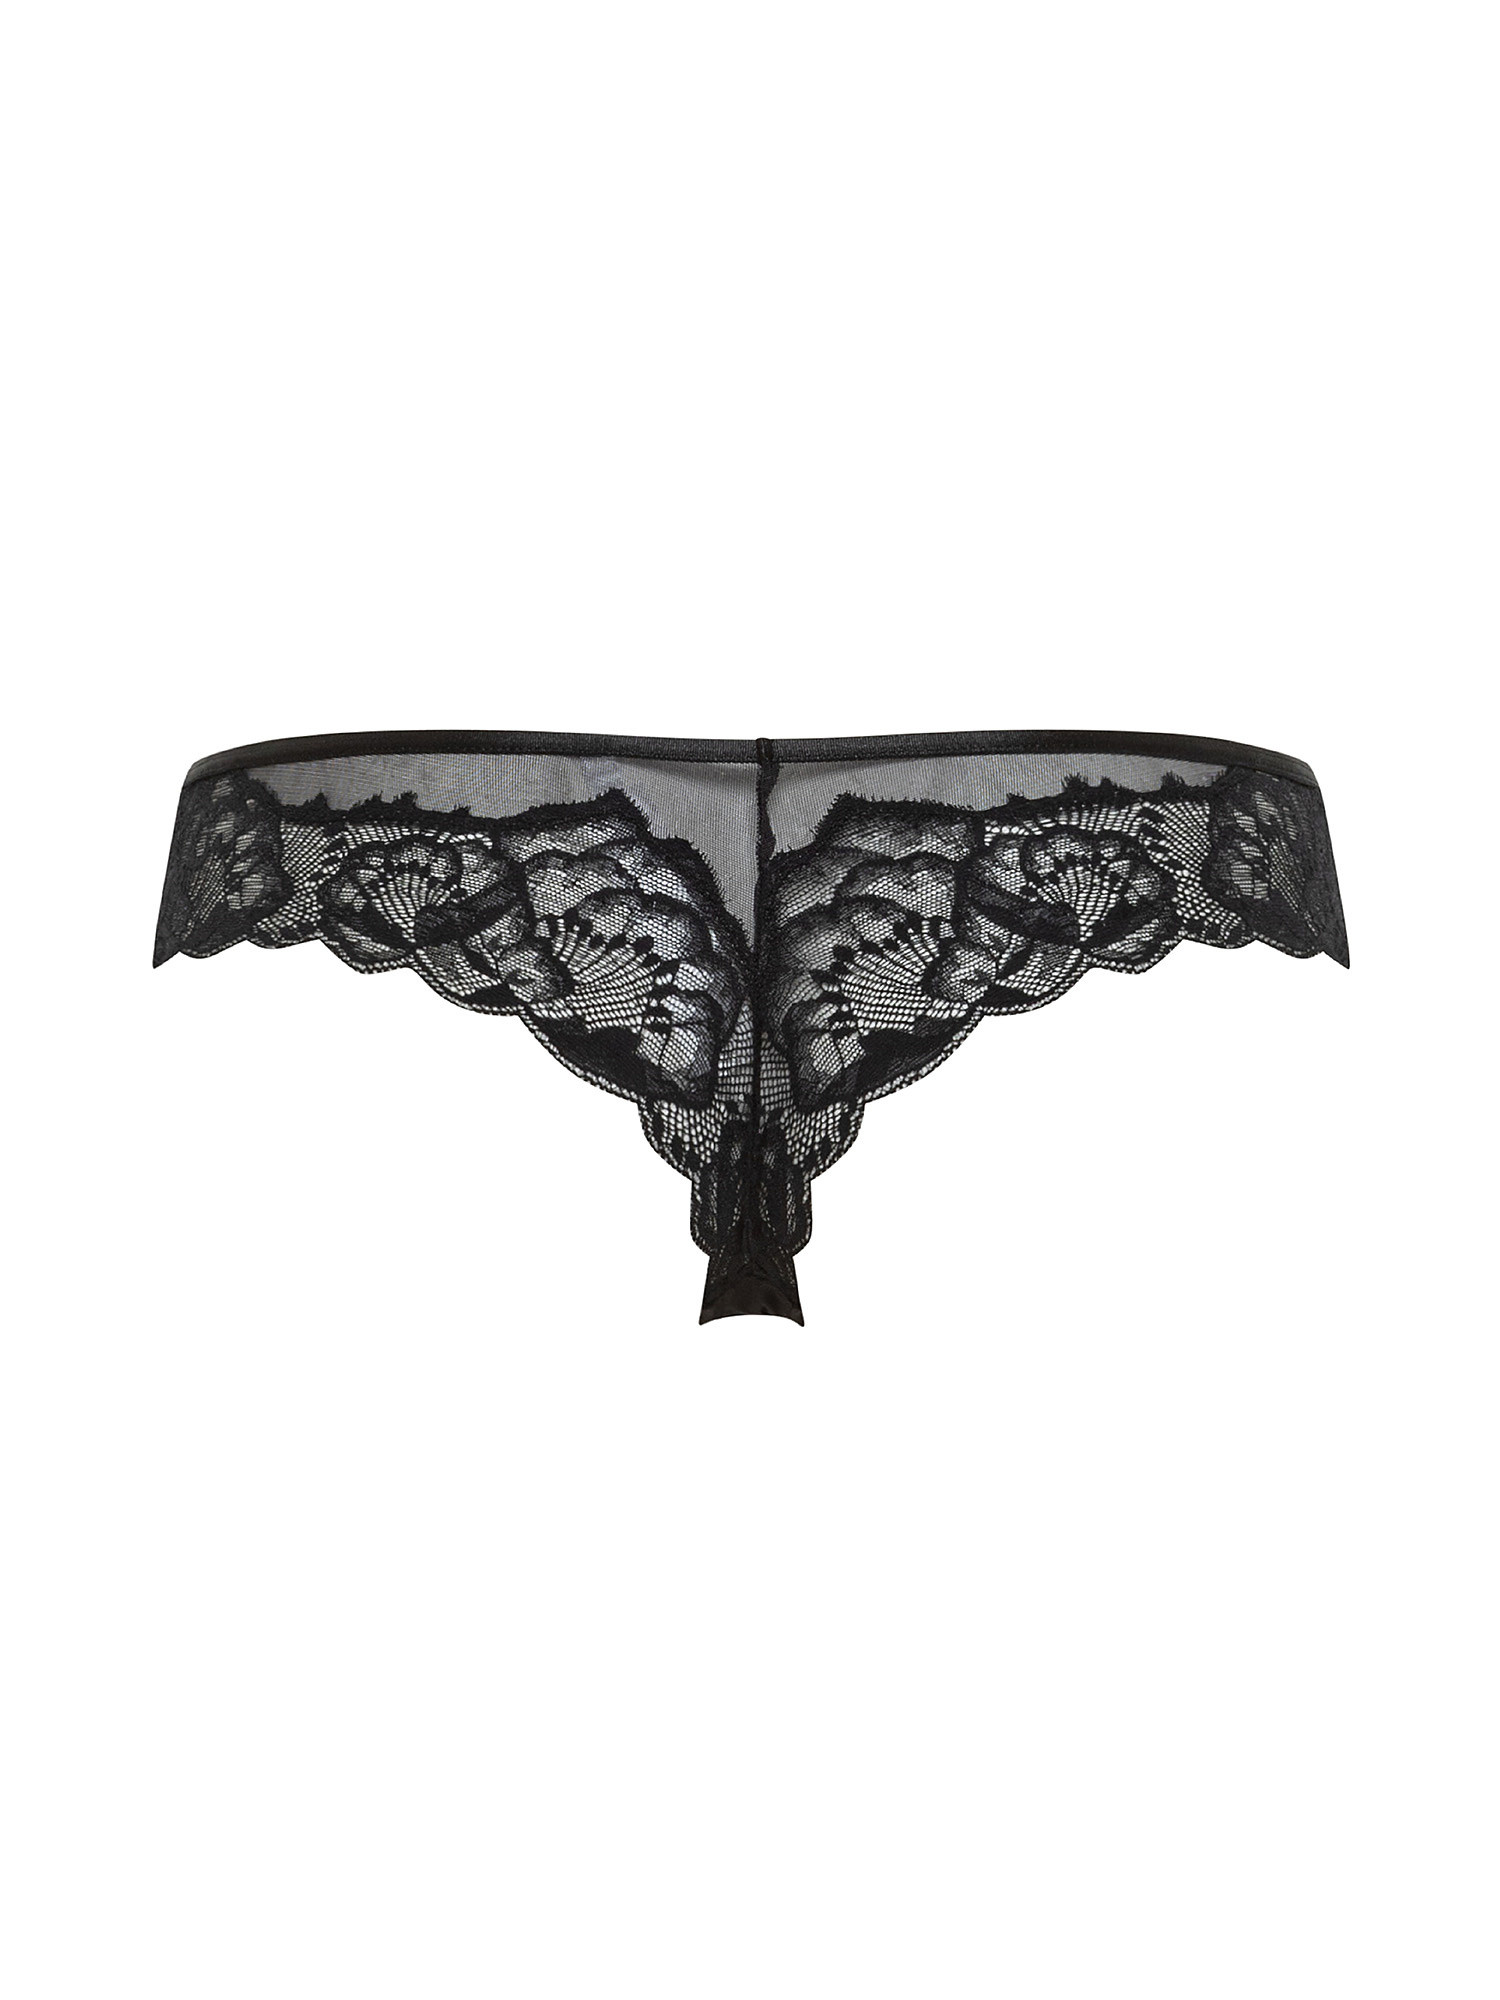 Thong with lace inserts, Black, large image number 1